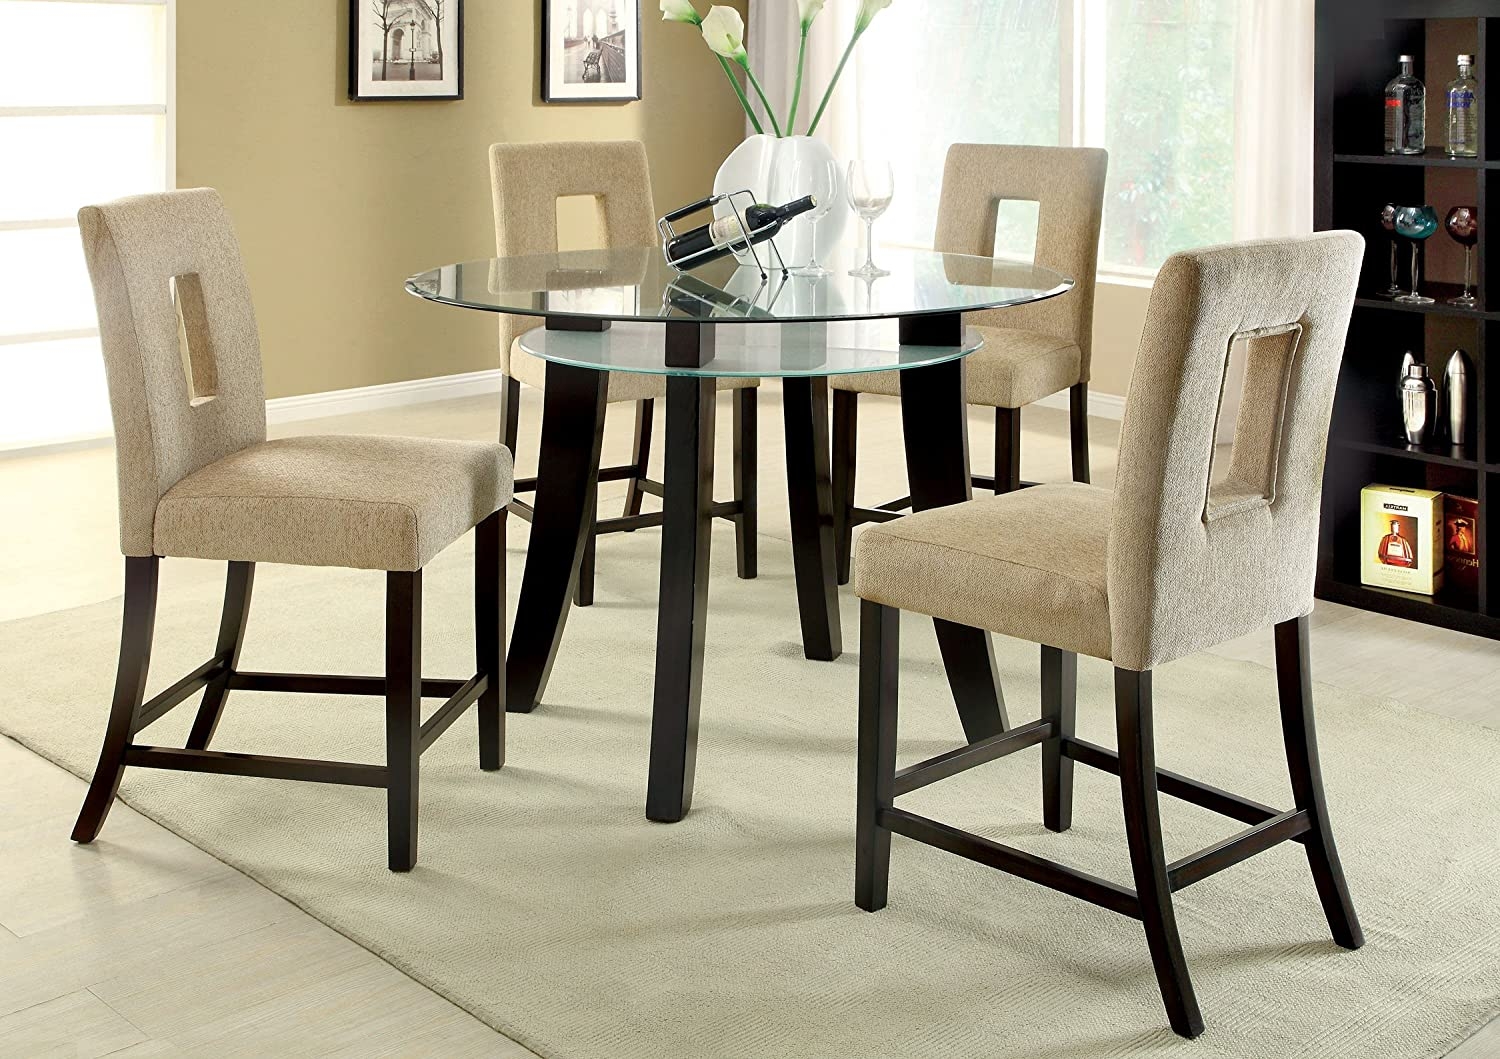 Simply Unique 5 Piece Counter Height Dining Set